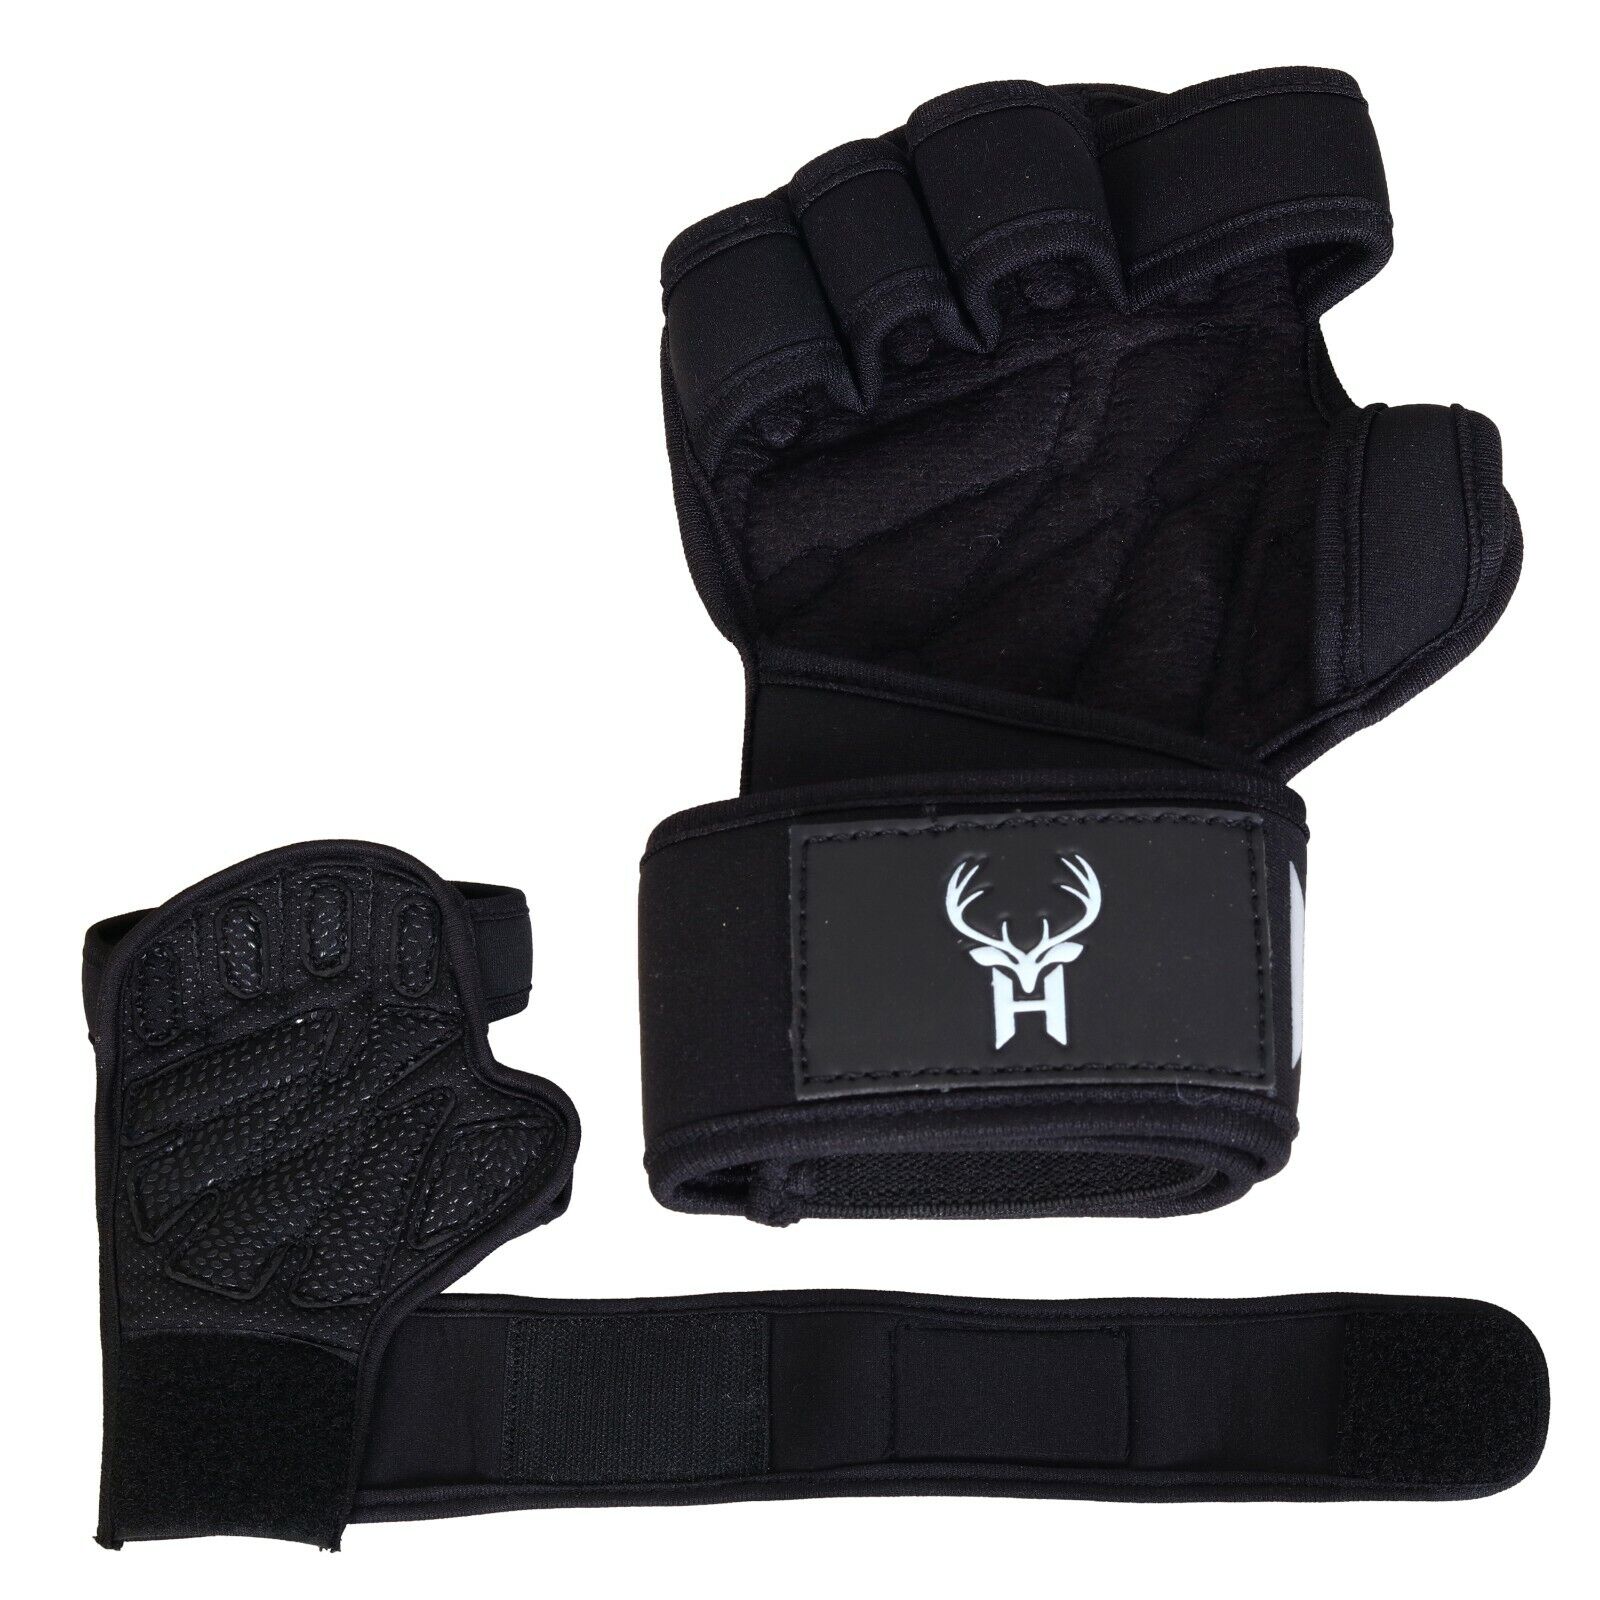 Gym Gloves Wrist Support - Weight Lifting Gym Gel padded Gloves strap